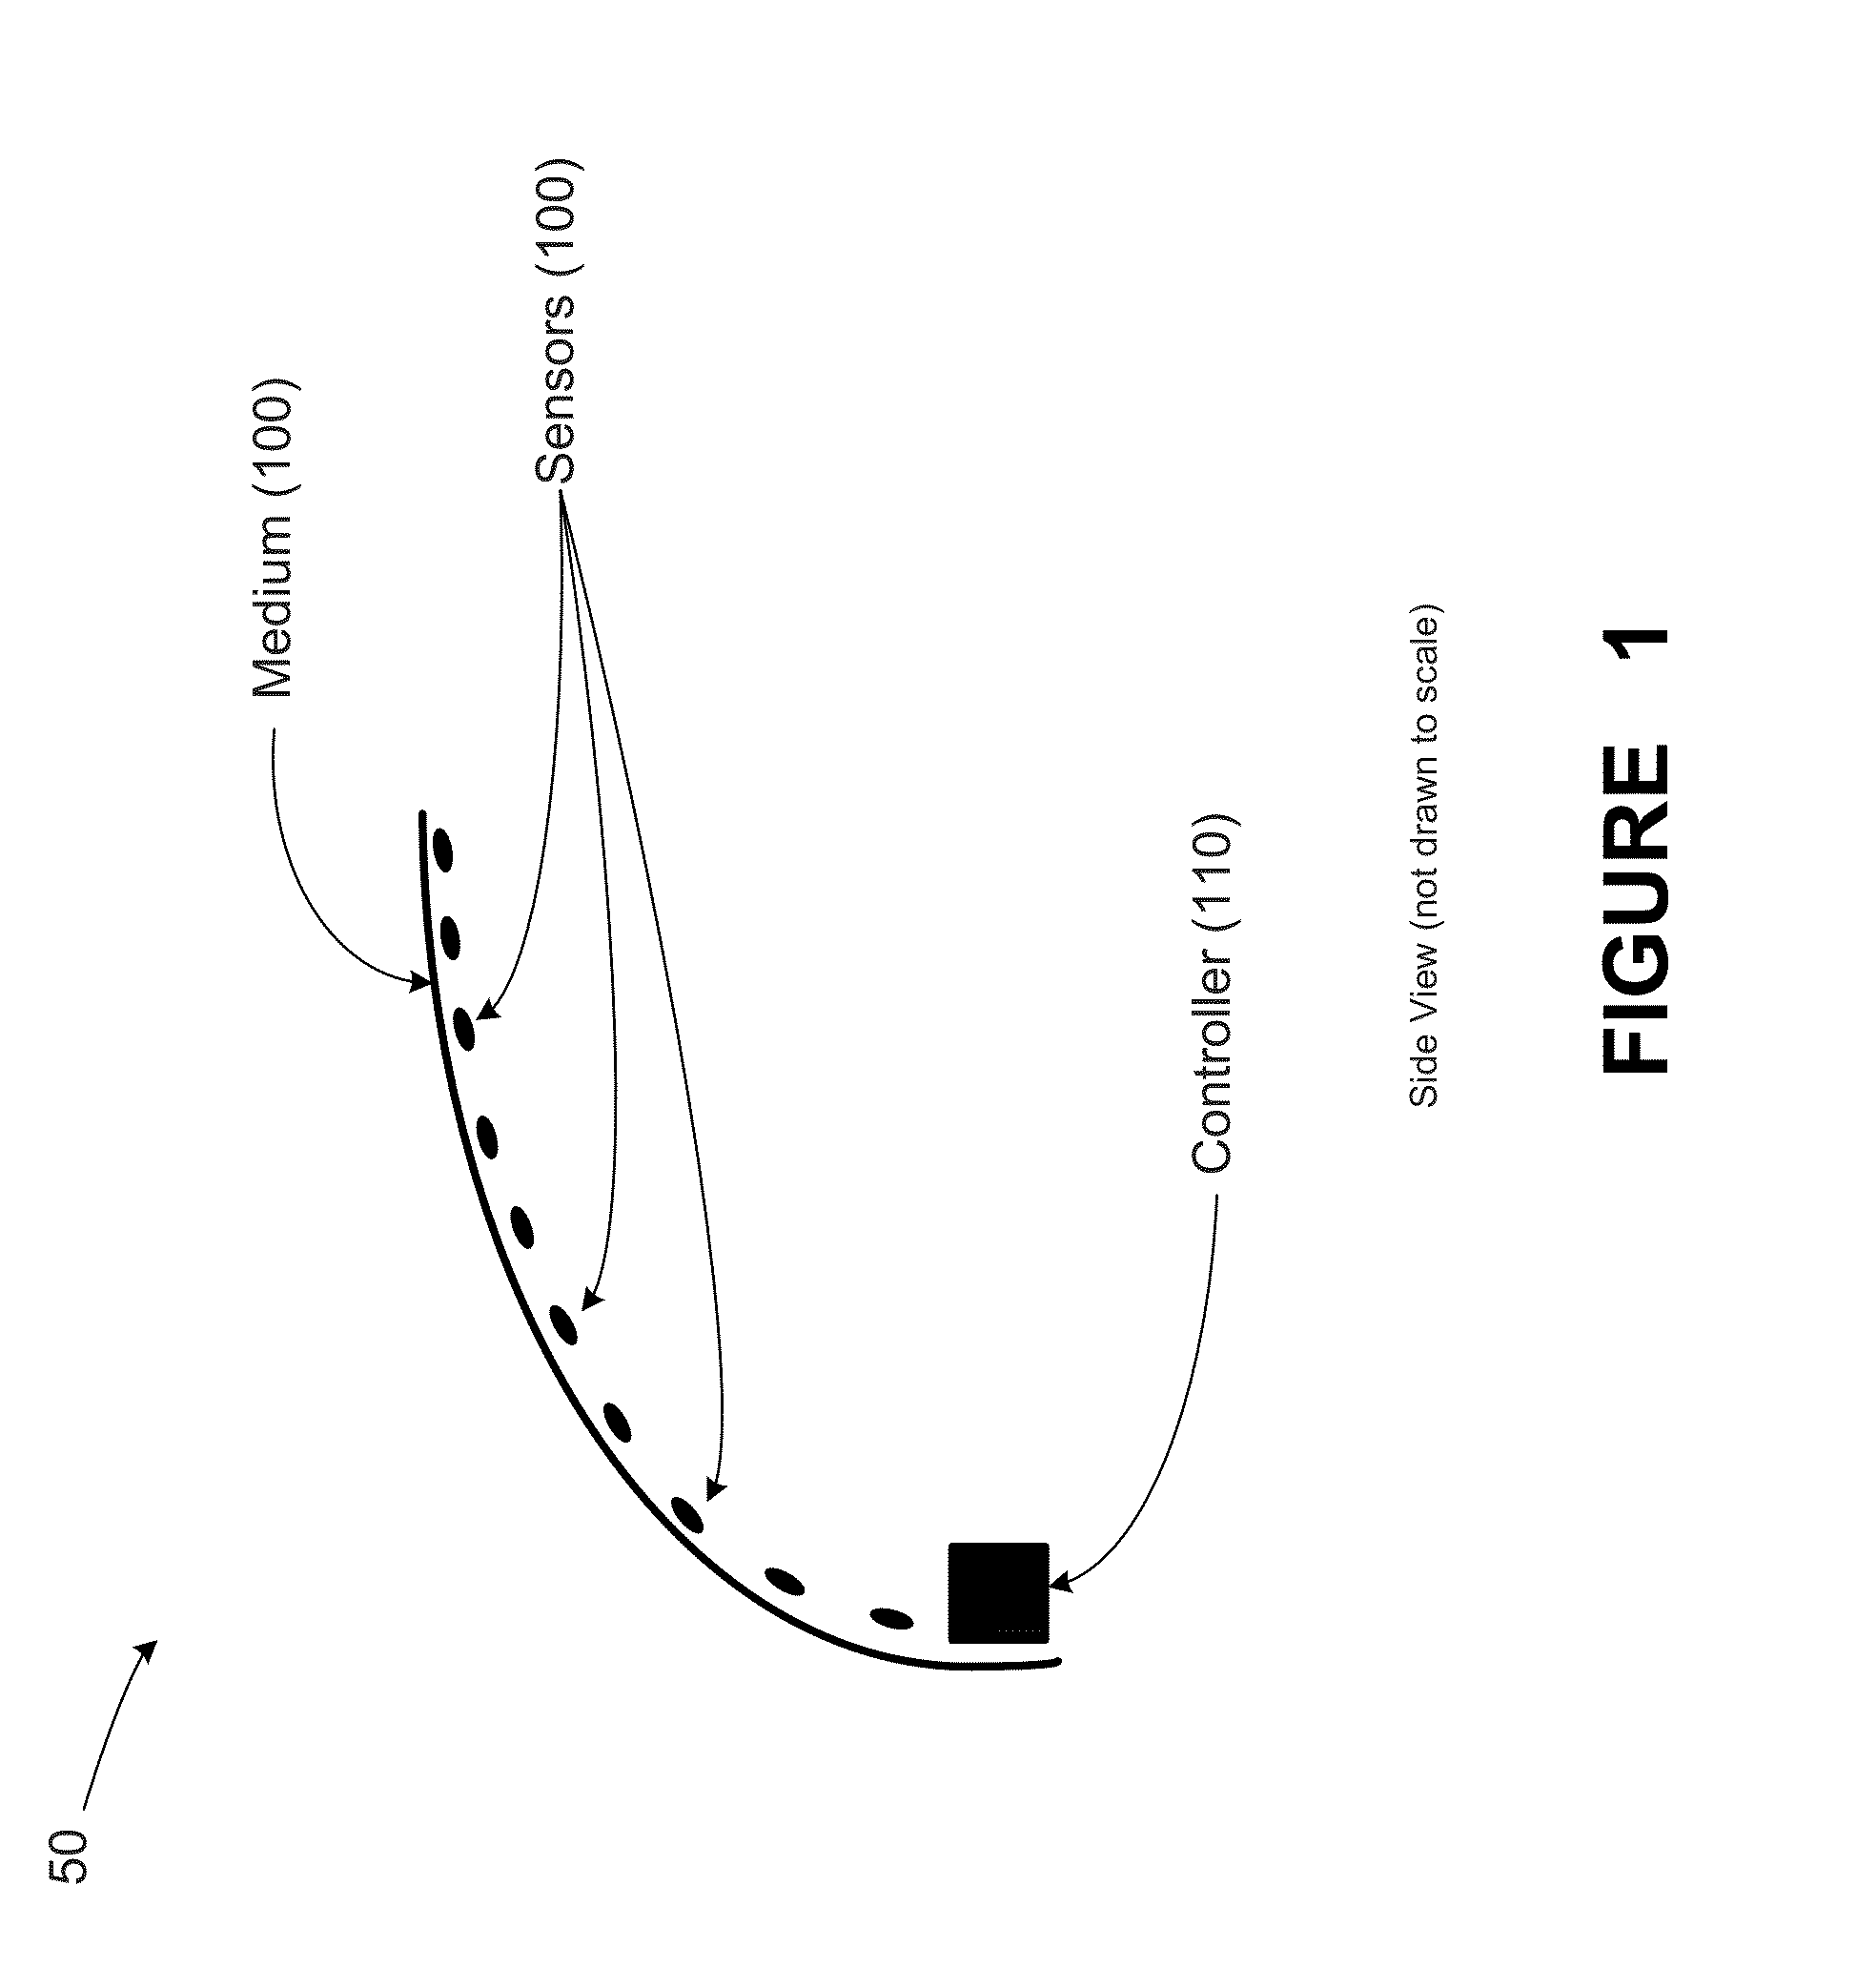 Method, apparatus and system for determining a health risk using a wearable housing for sensors